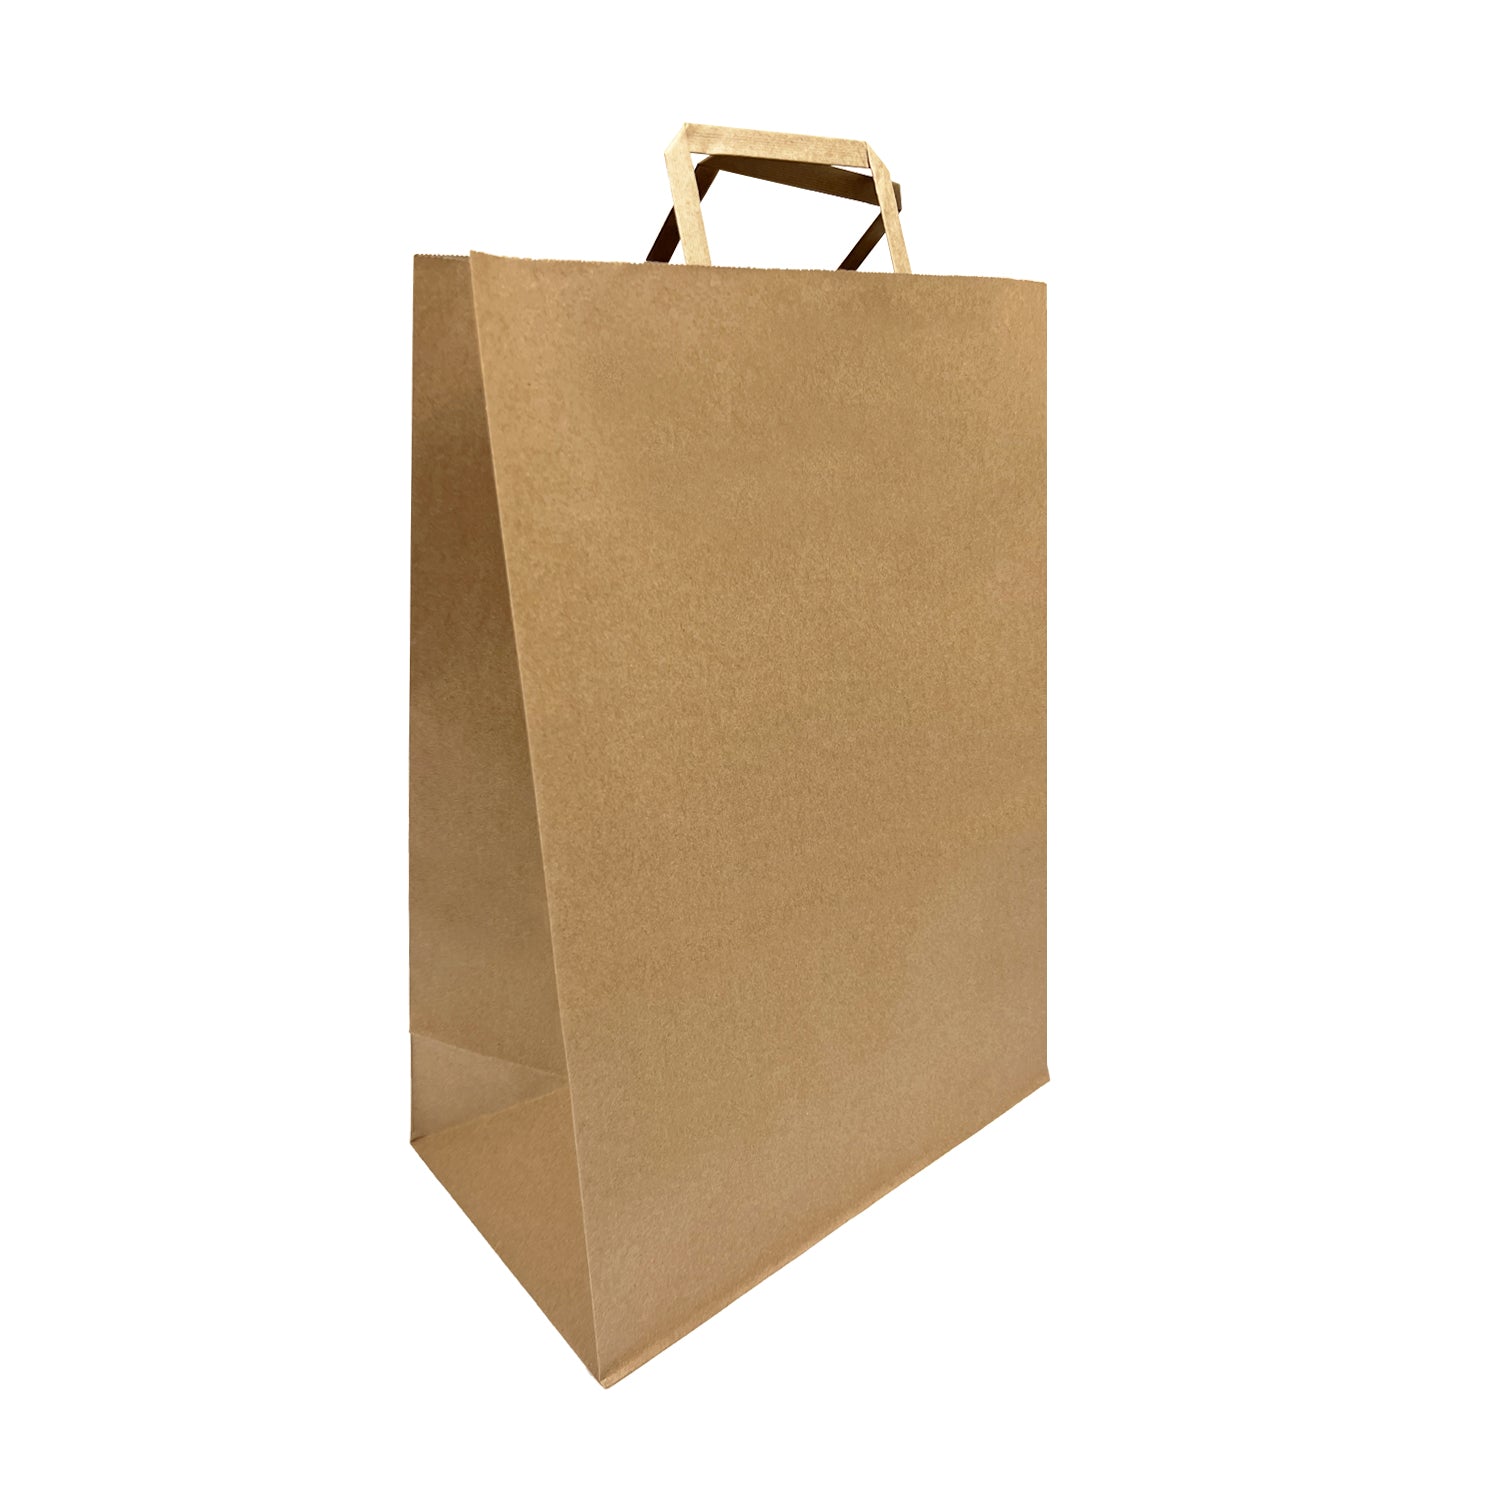 300 Pcs, Simba,  12x7x17 inches, Kraft Paper Bags, with Flat Handle